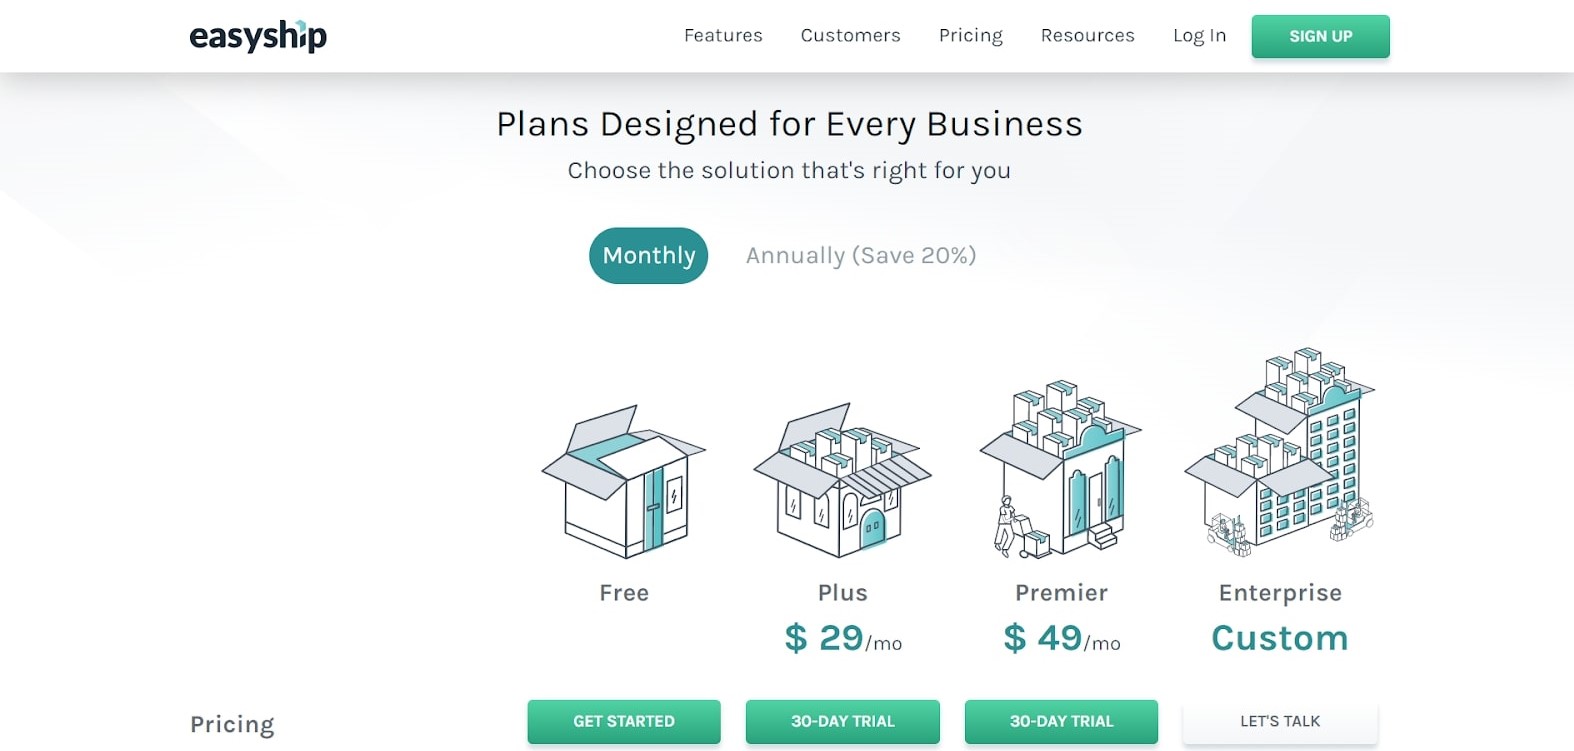 Easyship’s pricing plans